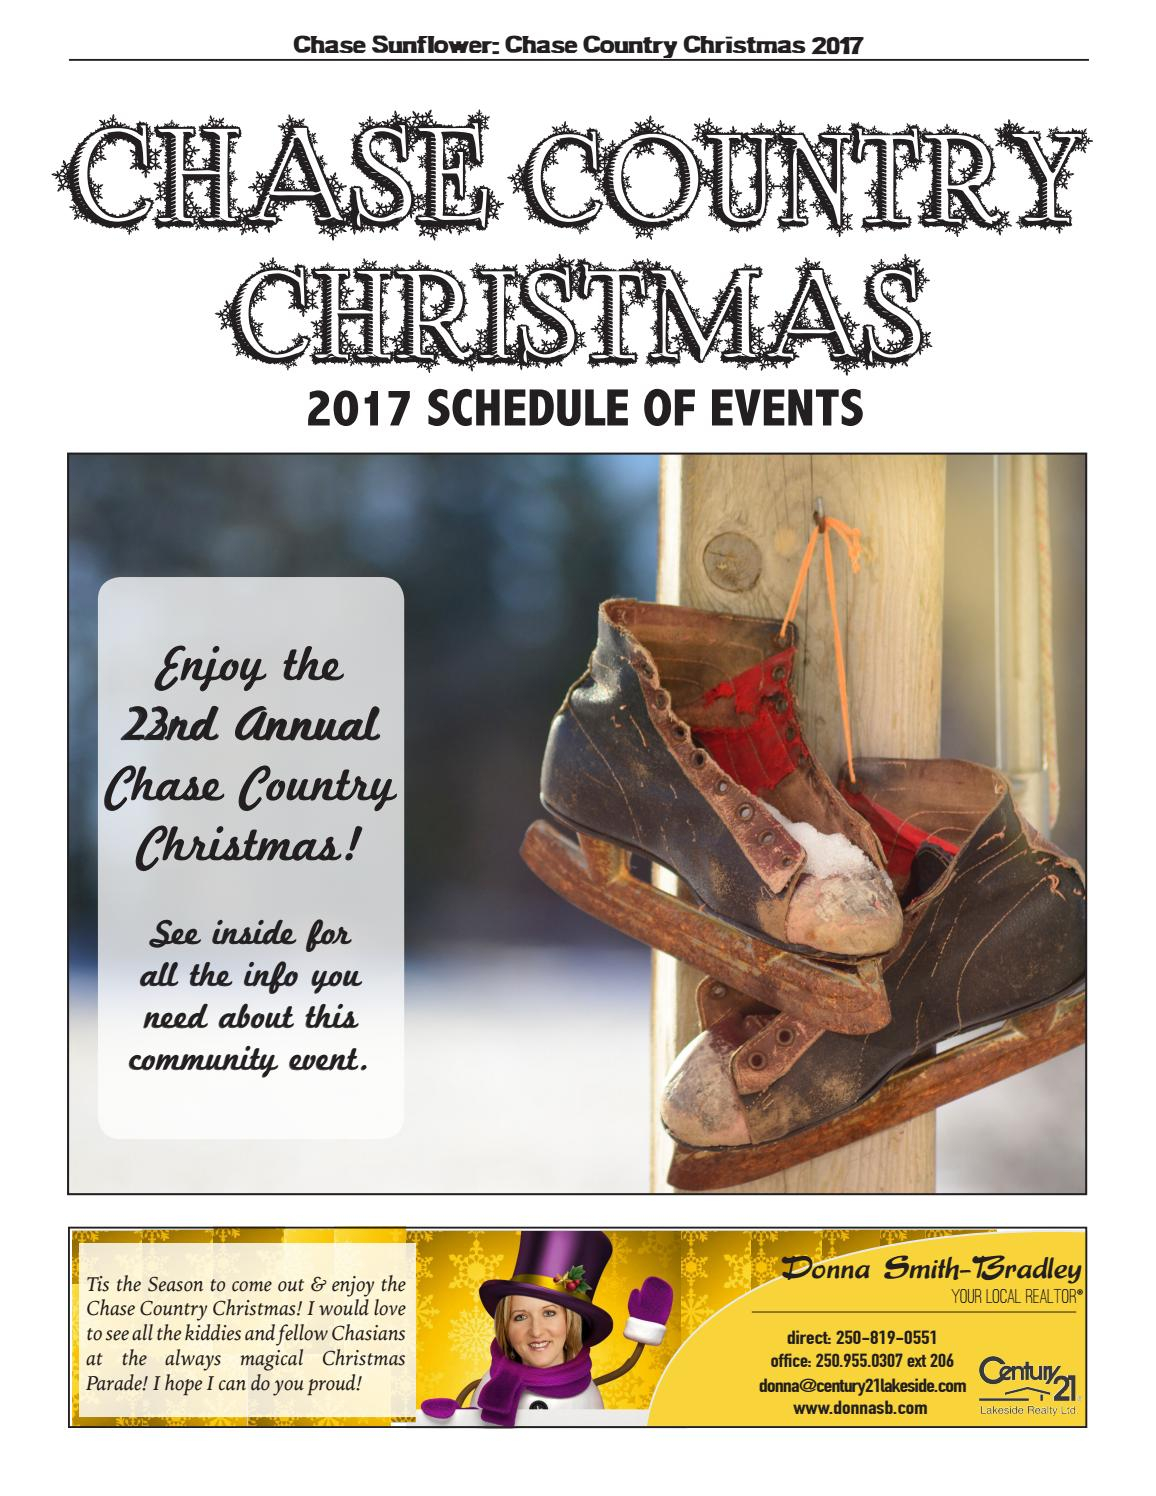 Chasecountrychristmas2017web By Chase Sunflower Issuu